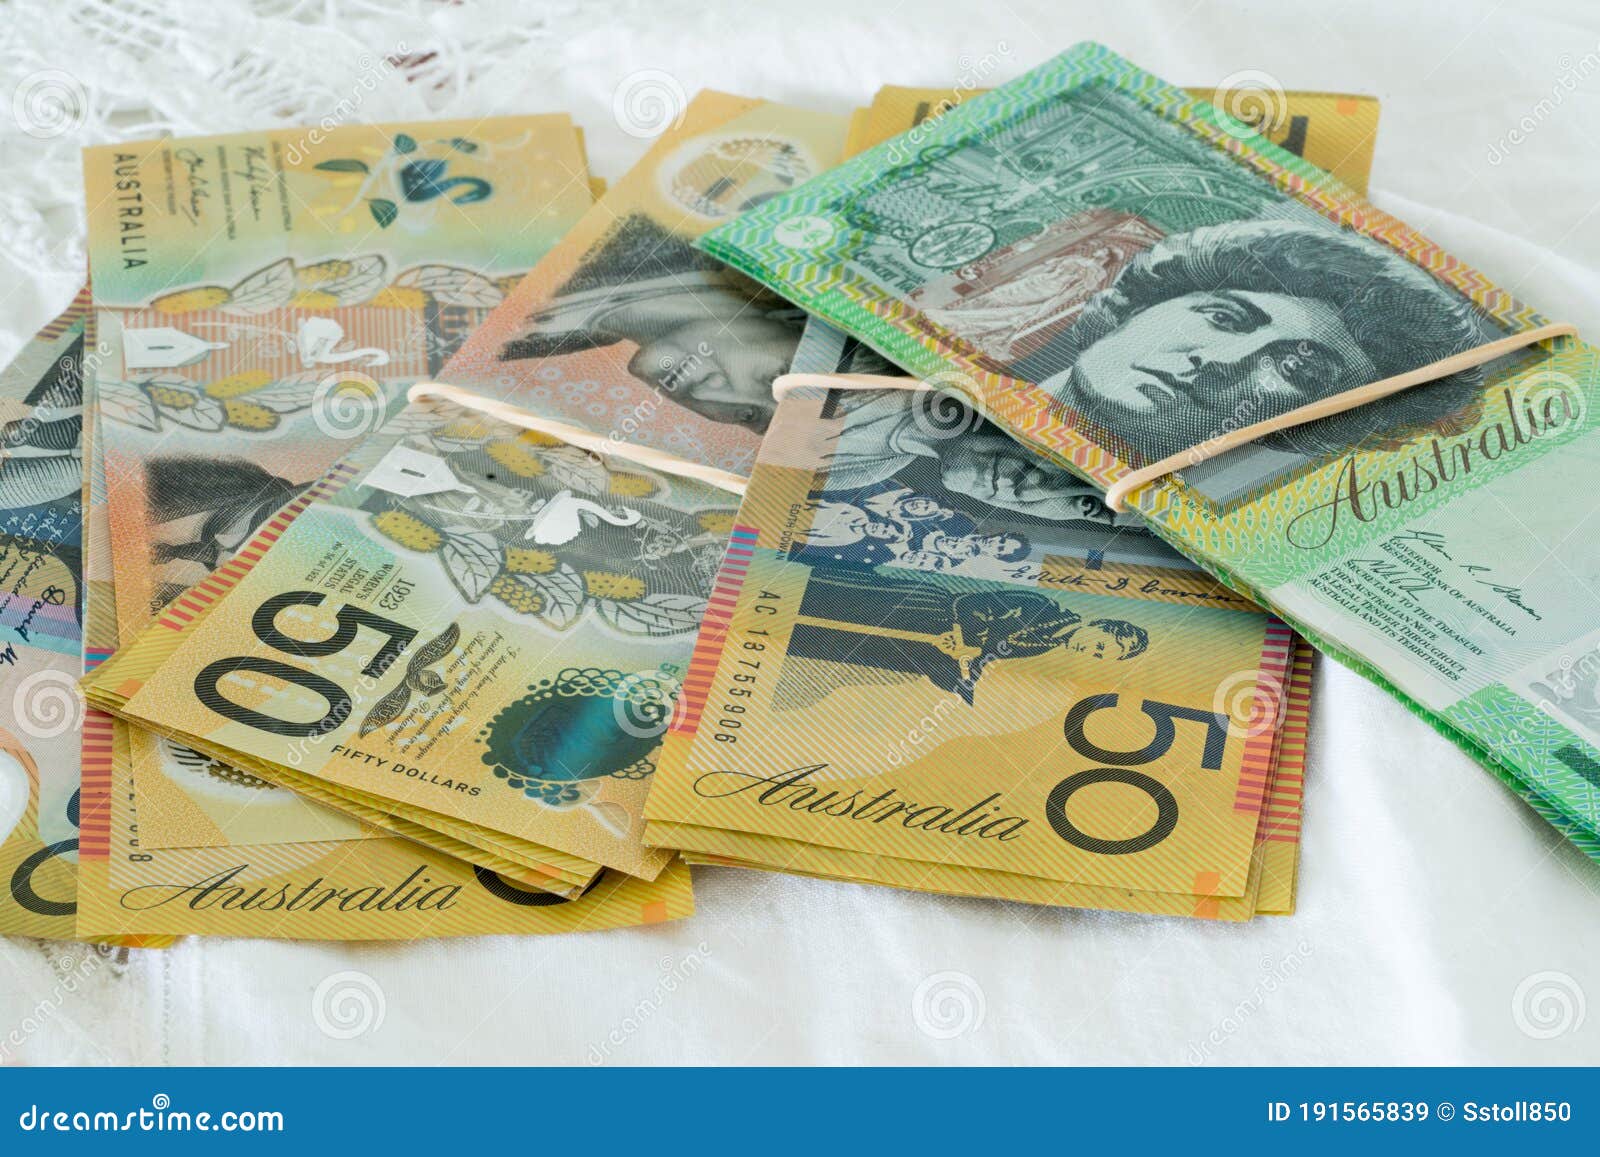 Bundles of Australian Money 50 and 100 Dollar Notes Stock Image - Image paper, notes: 191565839